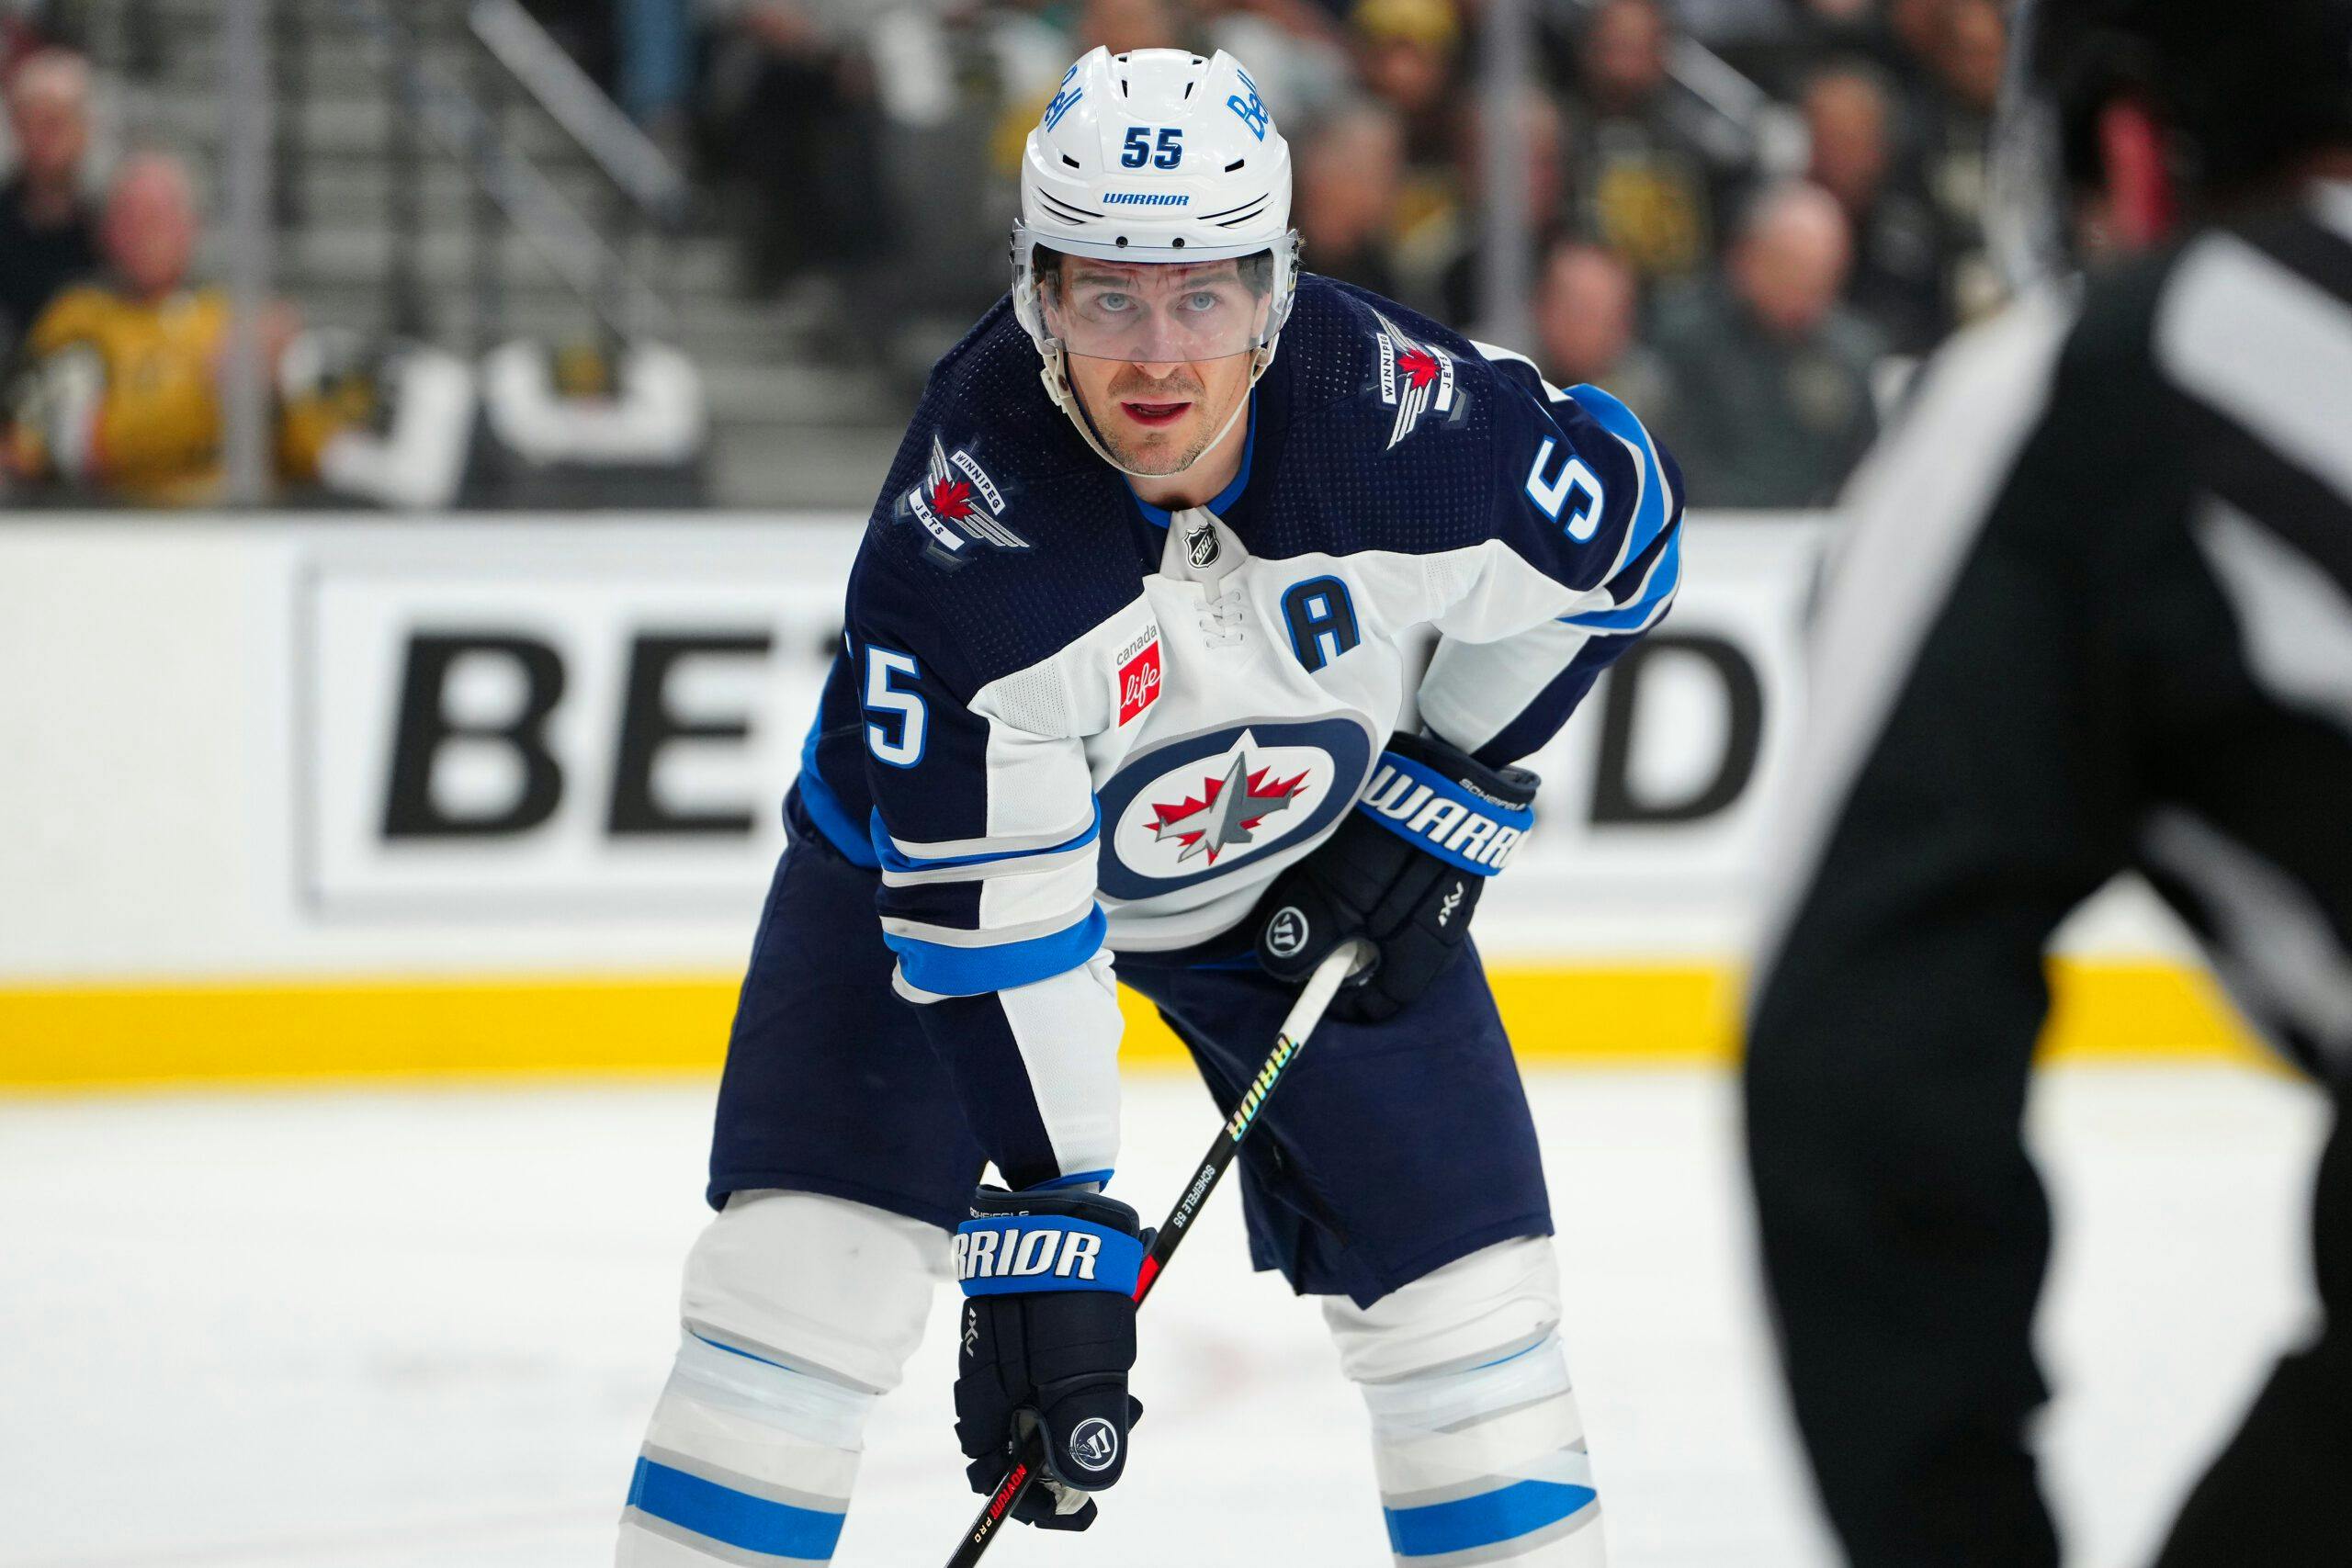 Jets’ center Mark Scheifele out day-to-day with lower-body injury